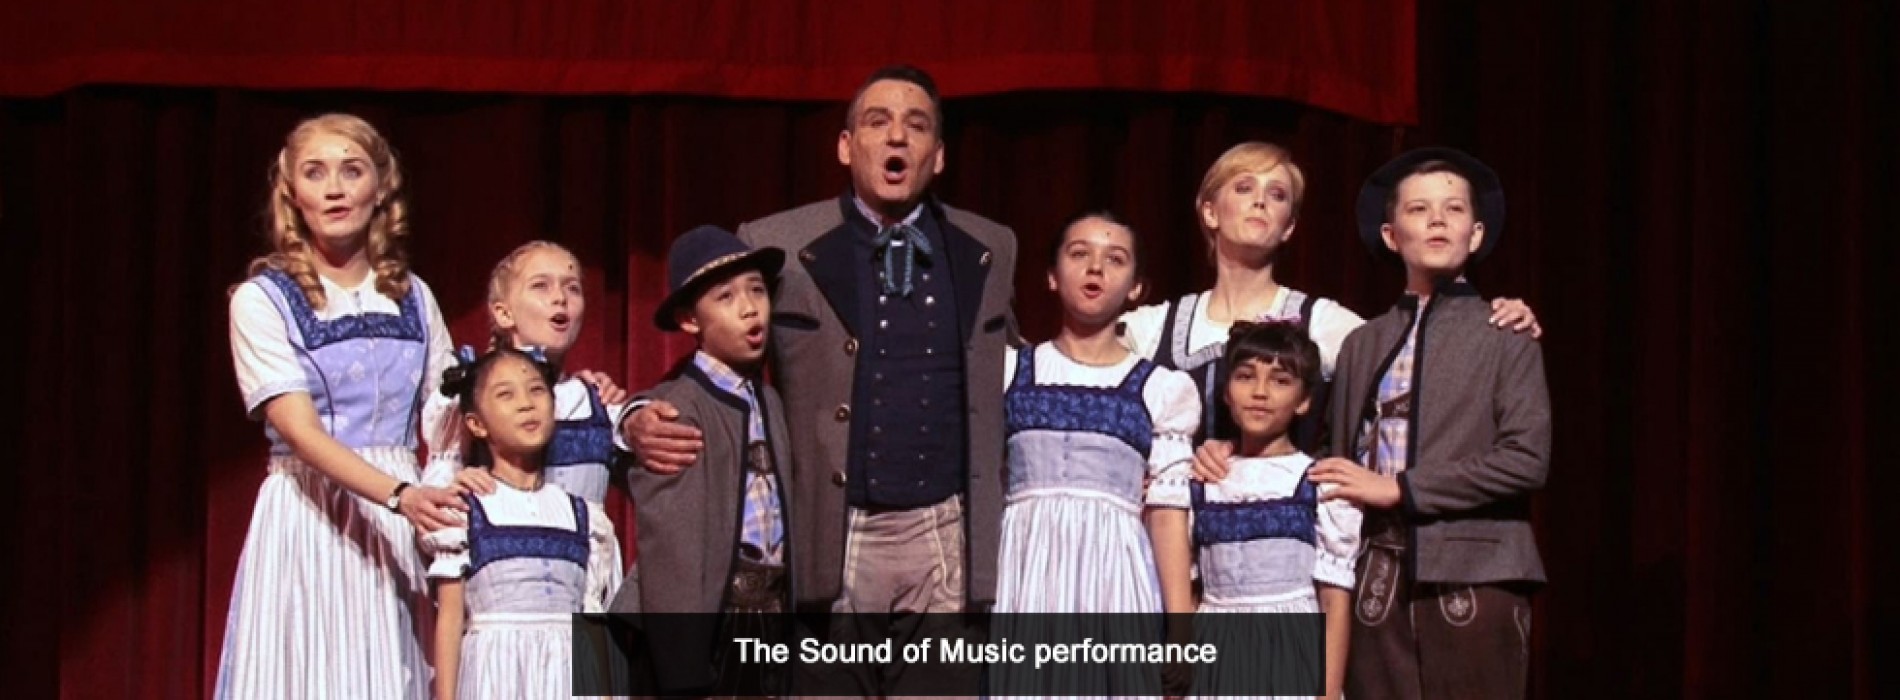 American musical group ‘The Sound of Music’ to perform for the first time in South Asia